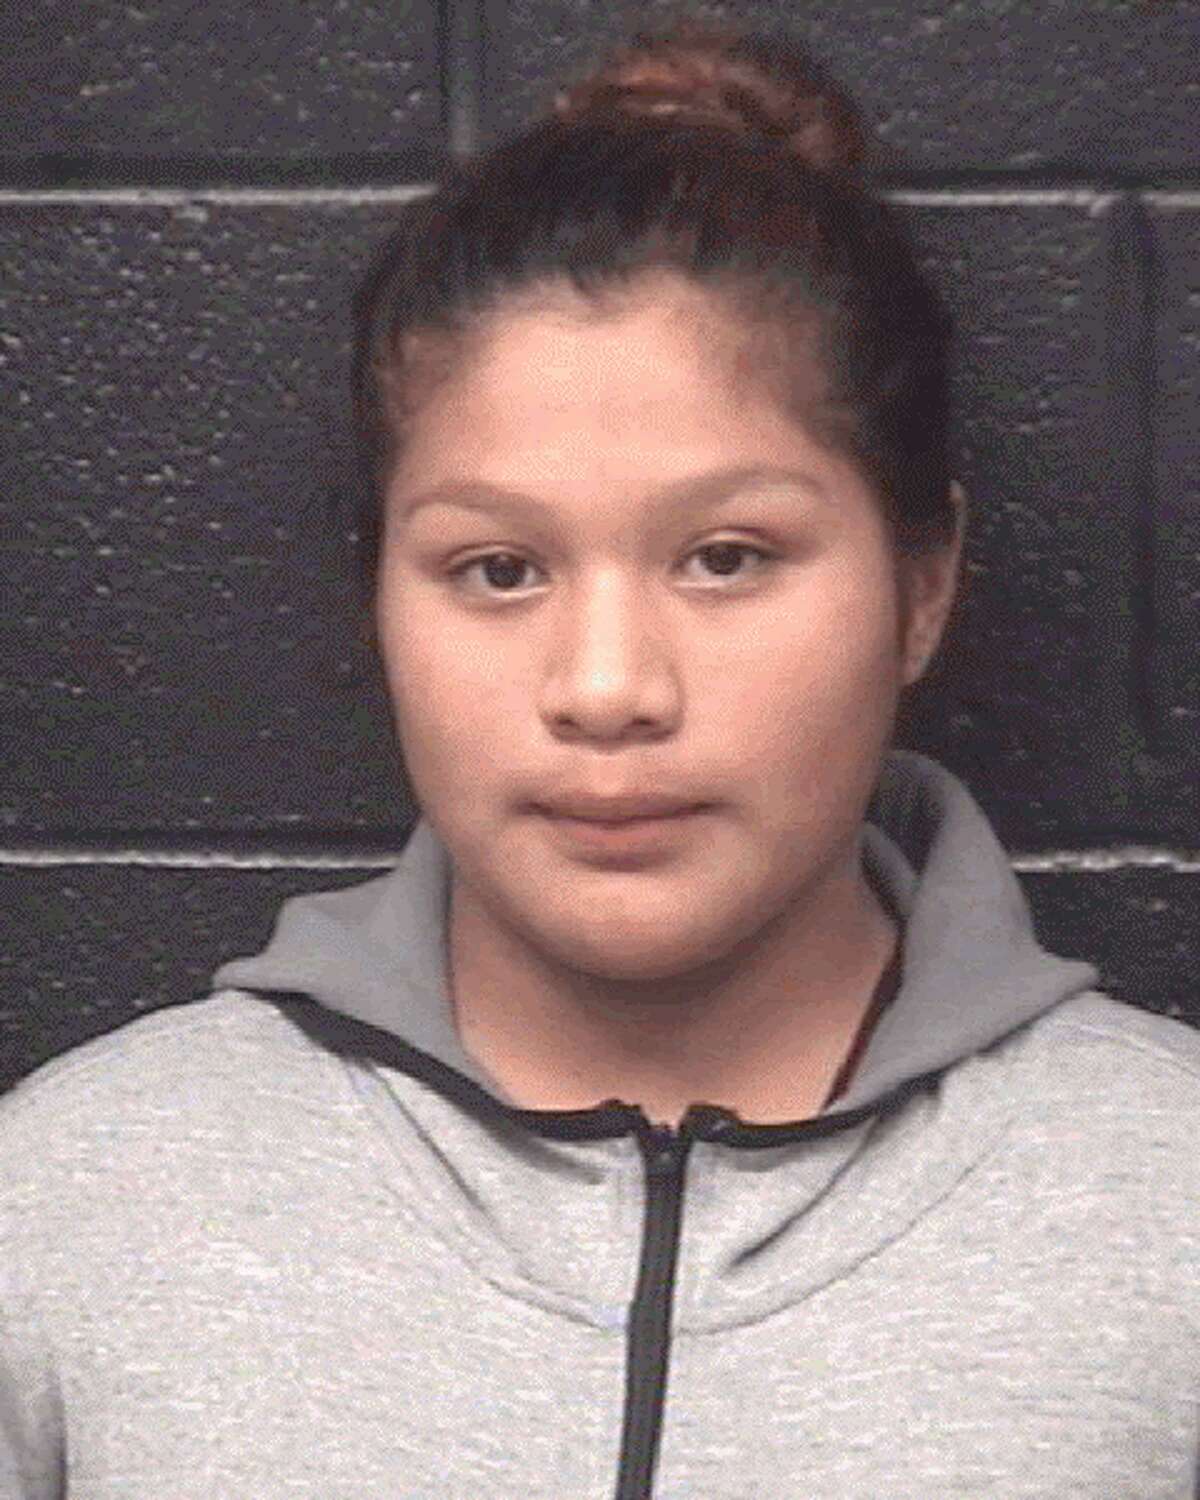 CORTEZ, TIFFANY (W F) (17) years of age was arrested on the charge of EVADING ARREST DETENTION (M), at 600 SAN DARIO AVE, at 0100 hours on 2/3/2017